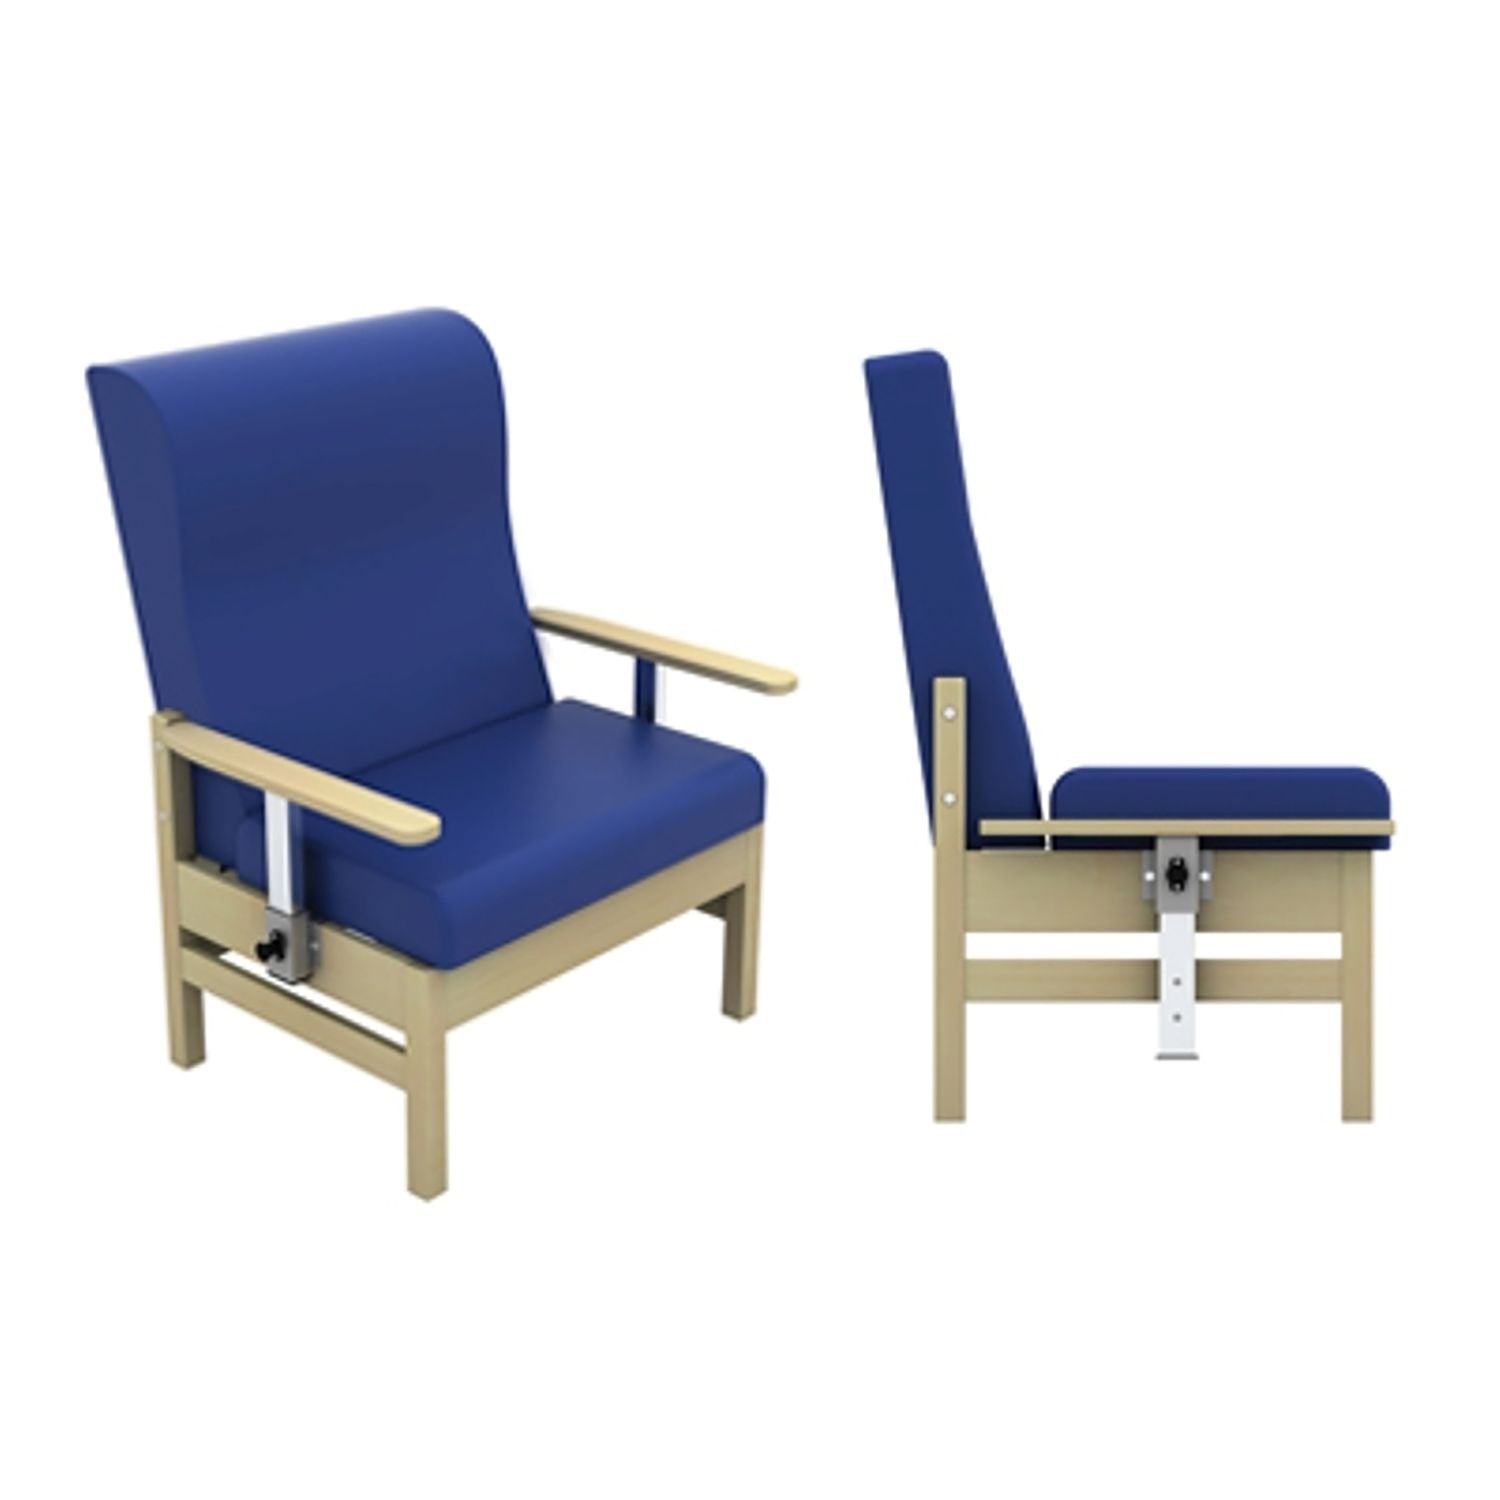 Bariatric Patient Armchair | High Back, Wings & Drop Arms | Anti-bacterial Vinyl Upholstery